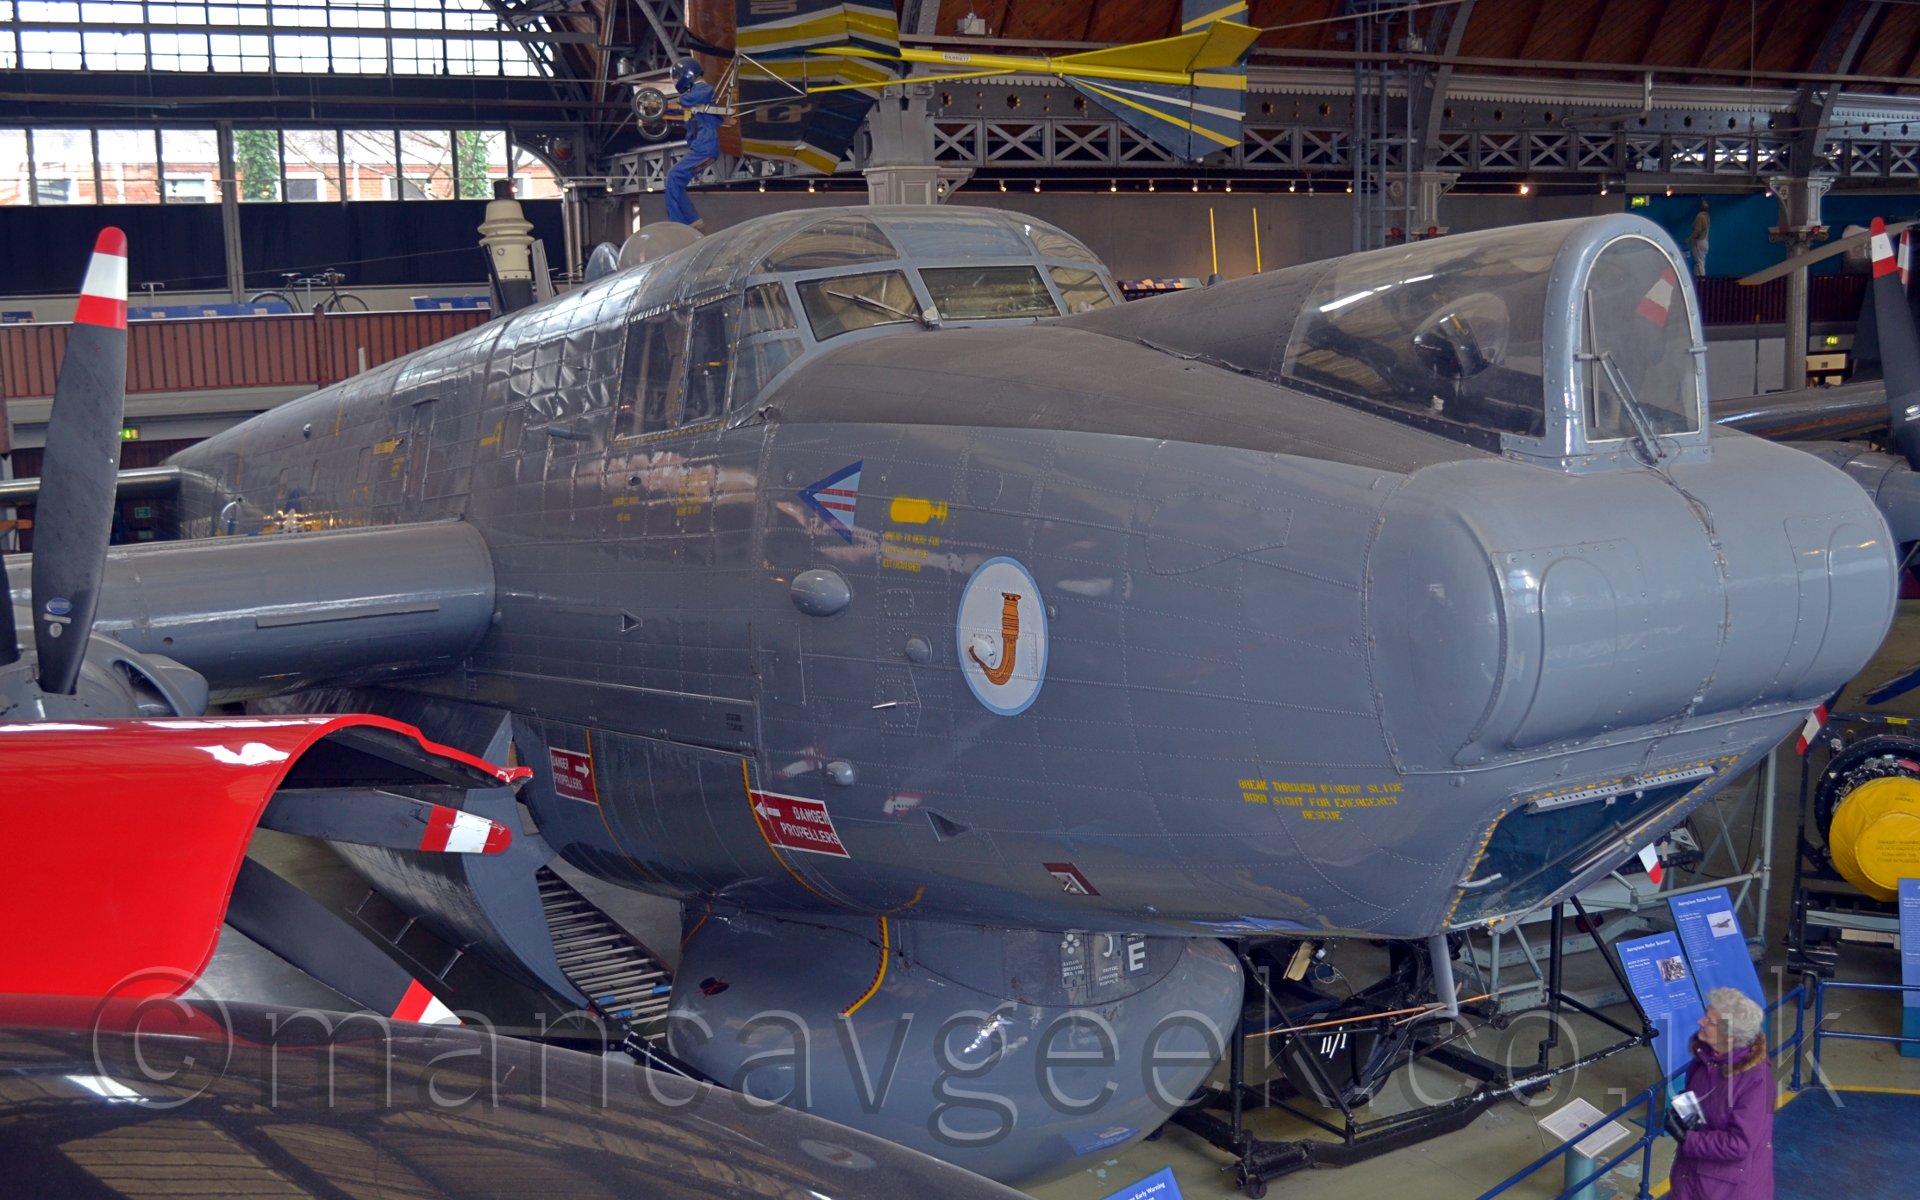 Close up of the nose and forward fuselage of a 4 engined grey military aircraft on display in a museum.